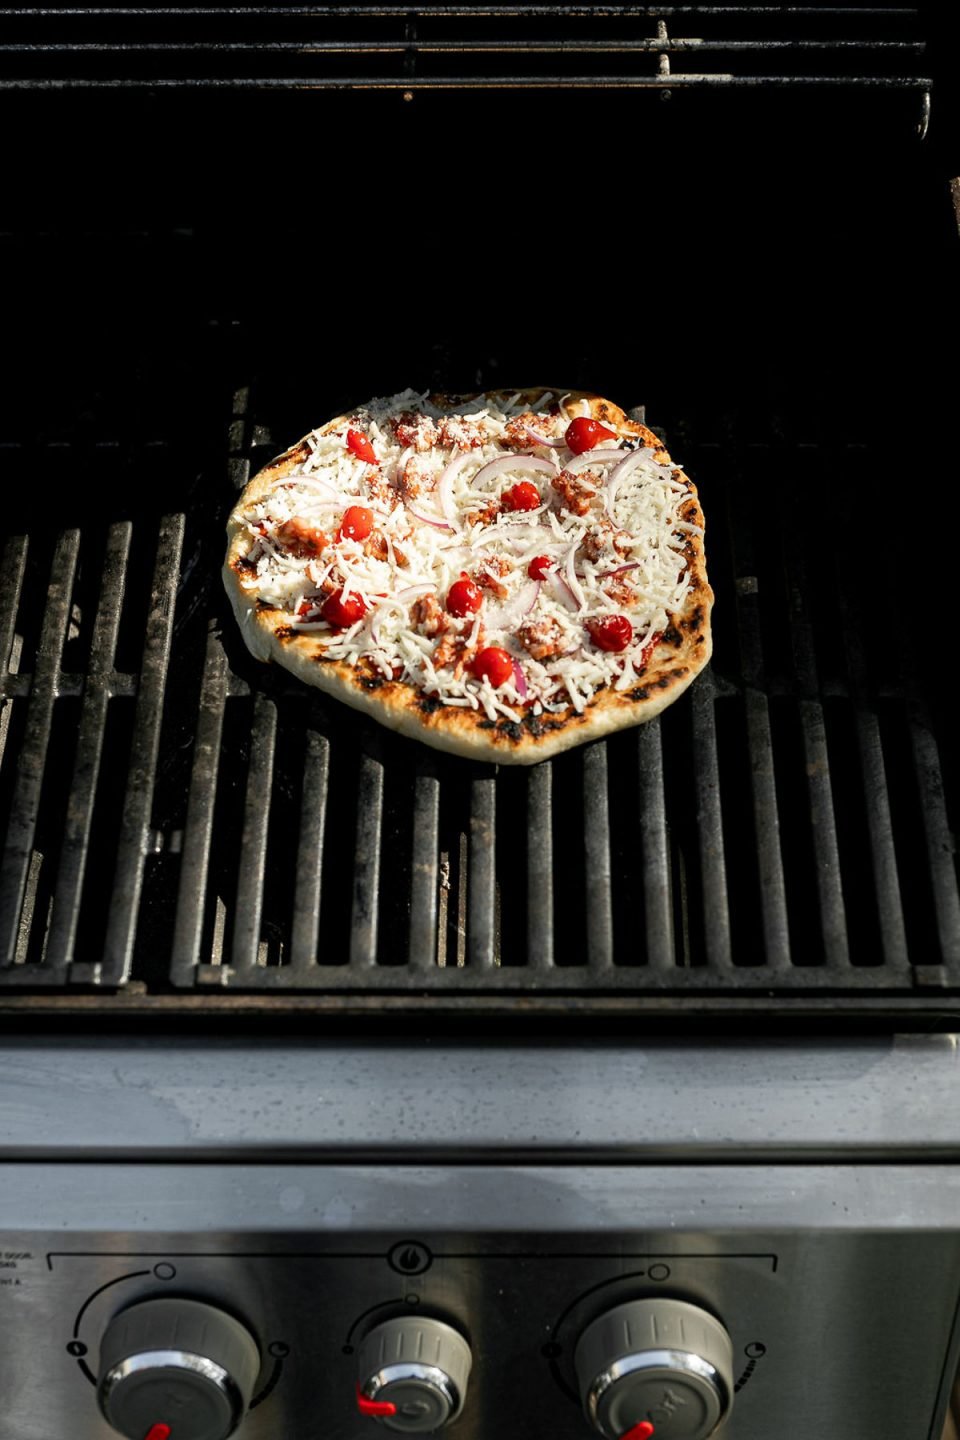 Assembled pizza shown on grill grates over direct heat.